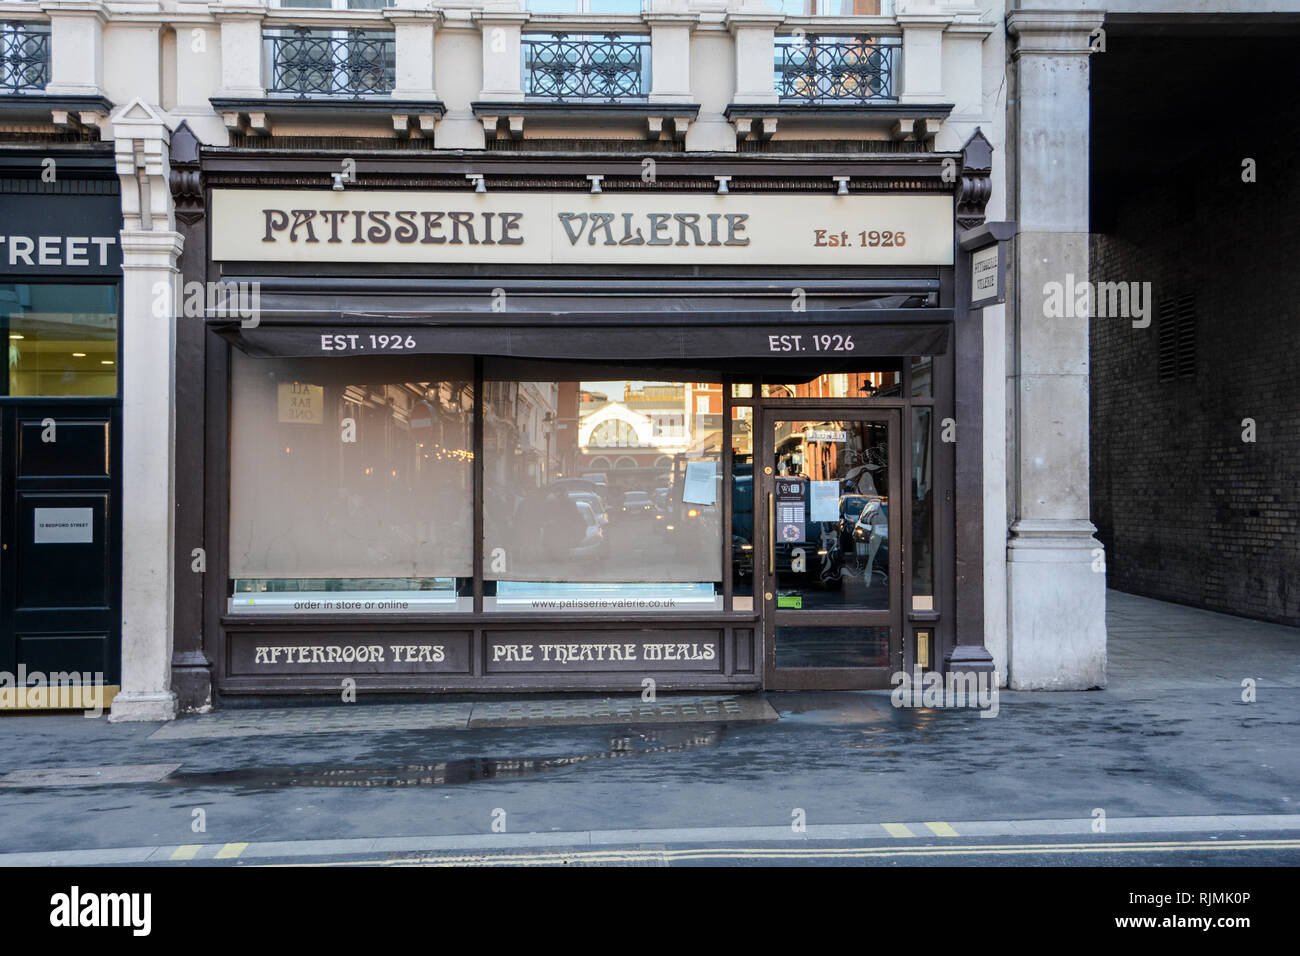 The exterior of the now-closed Patisserie Valerie cafe chain, London, UK Stock Photo